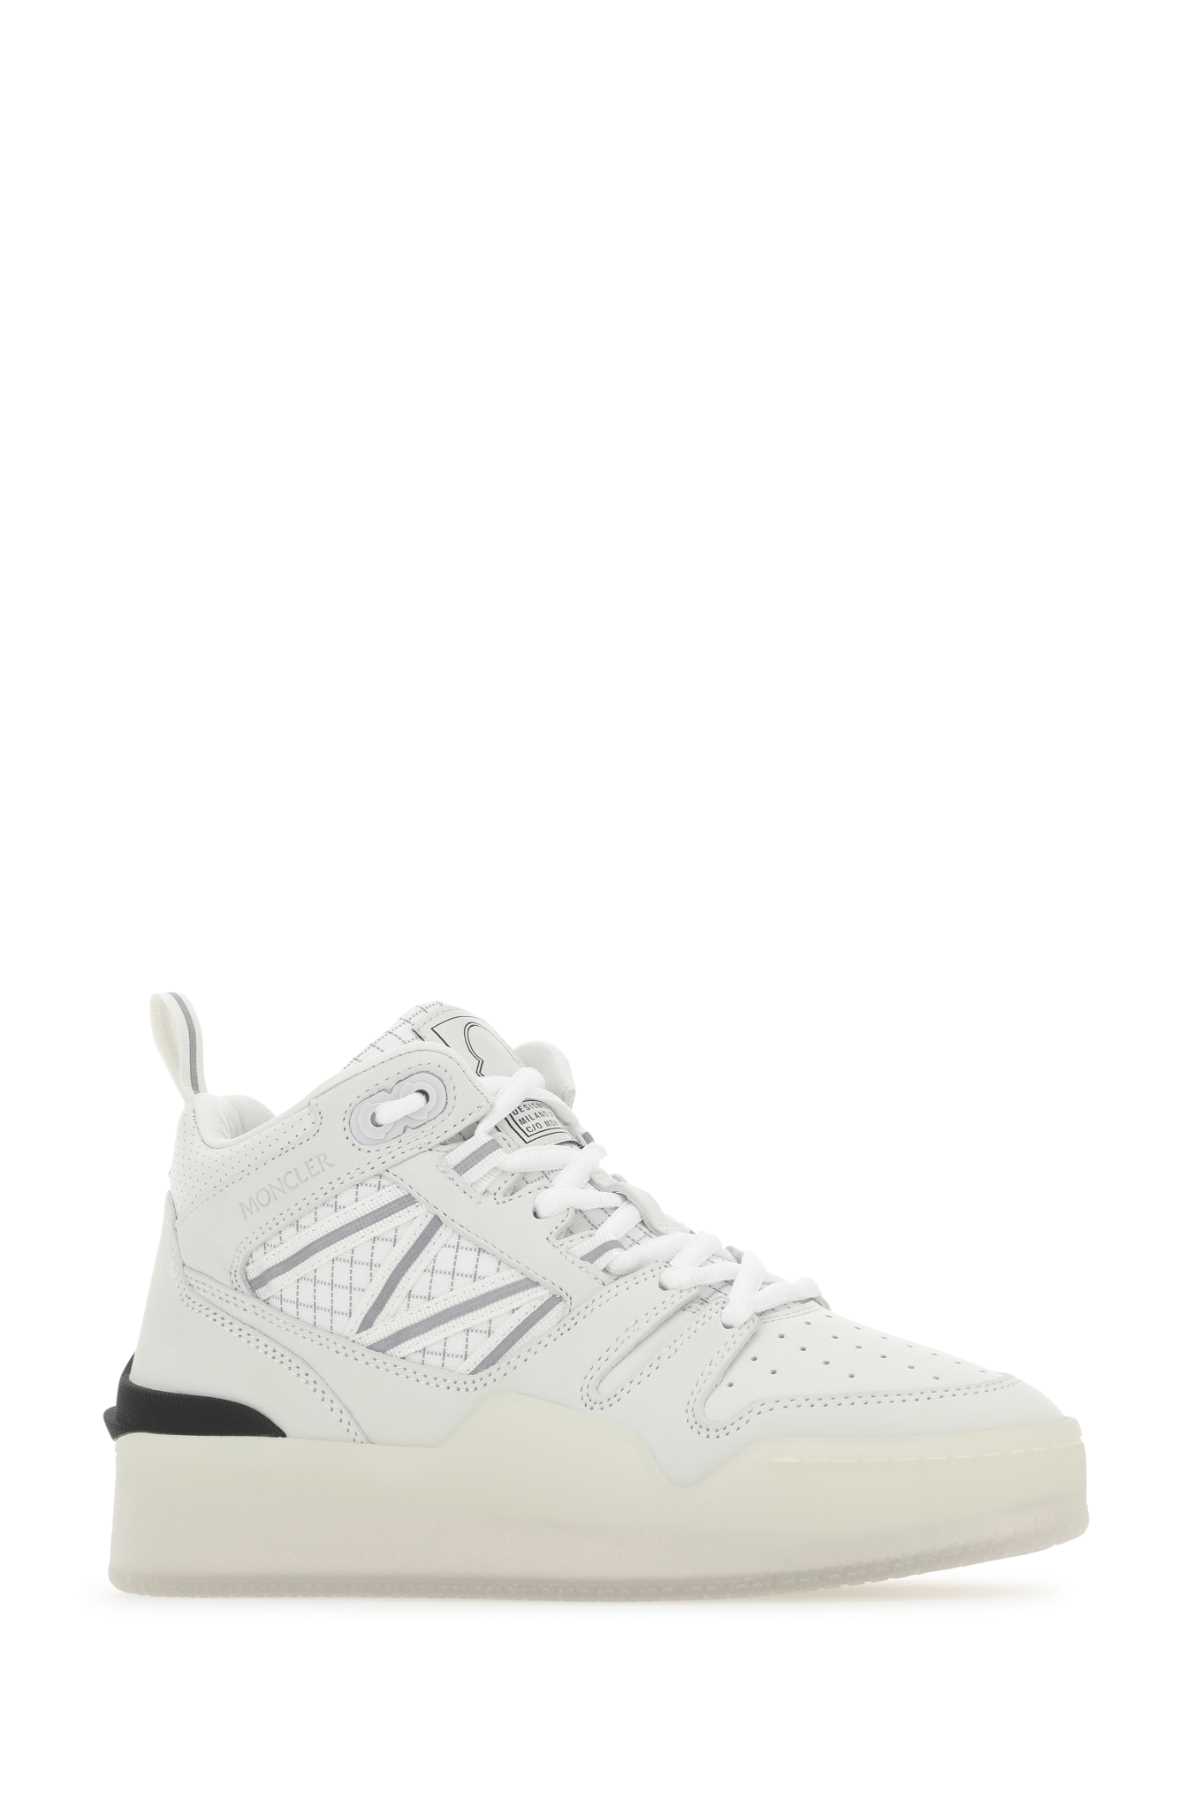 Moncler White Fabric And Nubuk Pivot Sneakers In 034